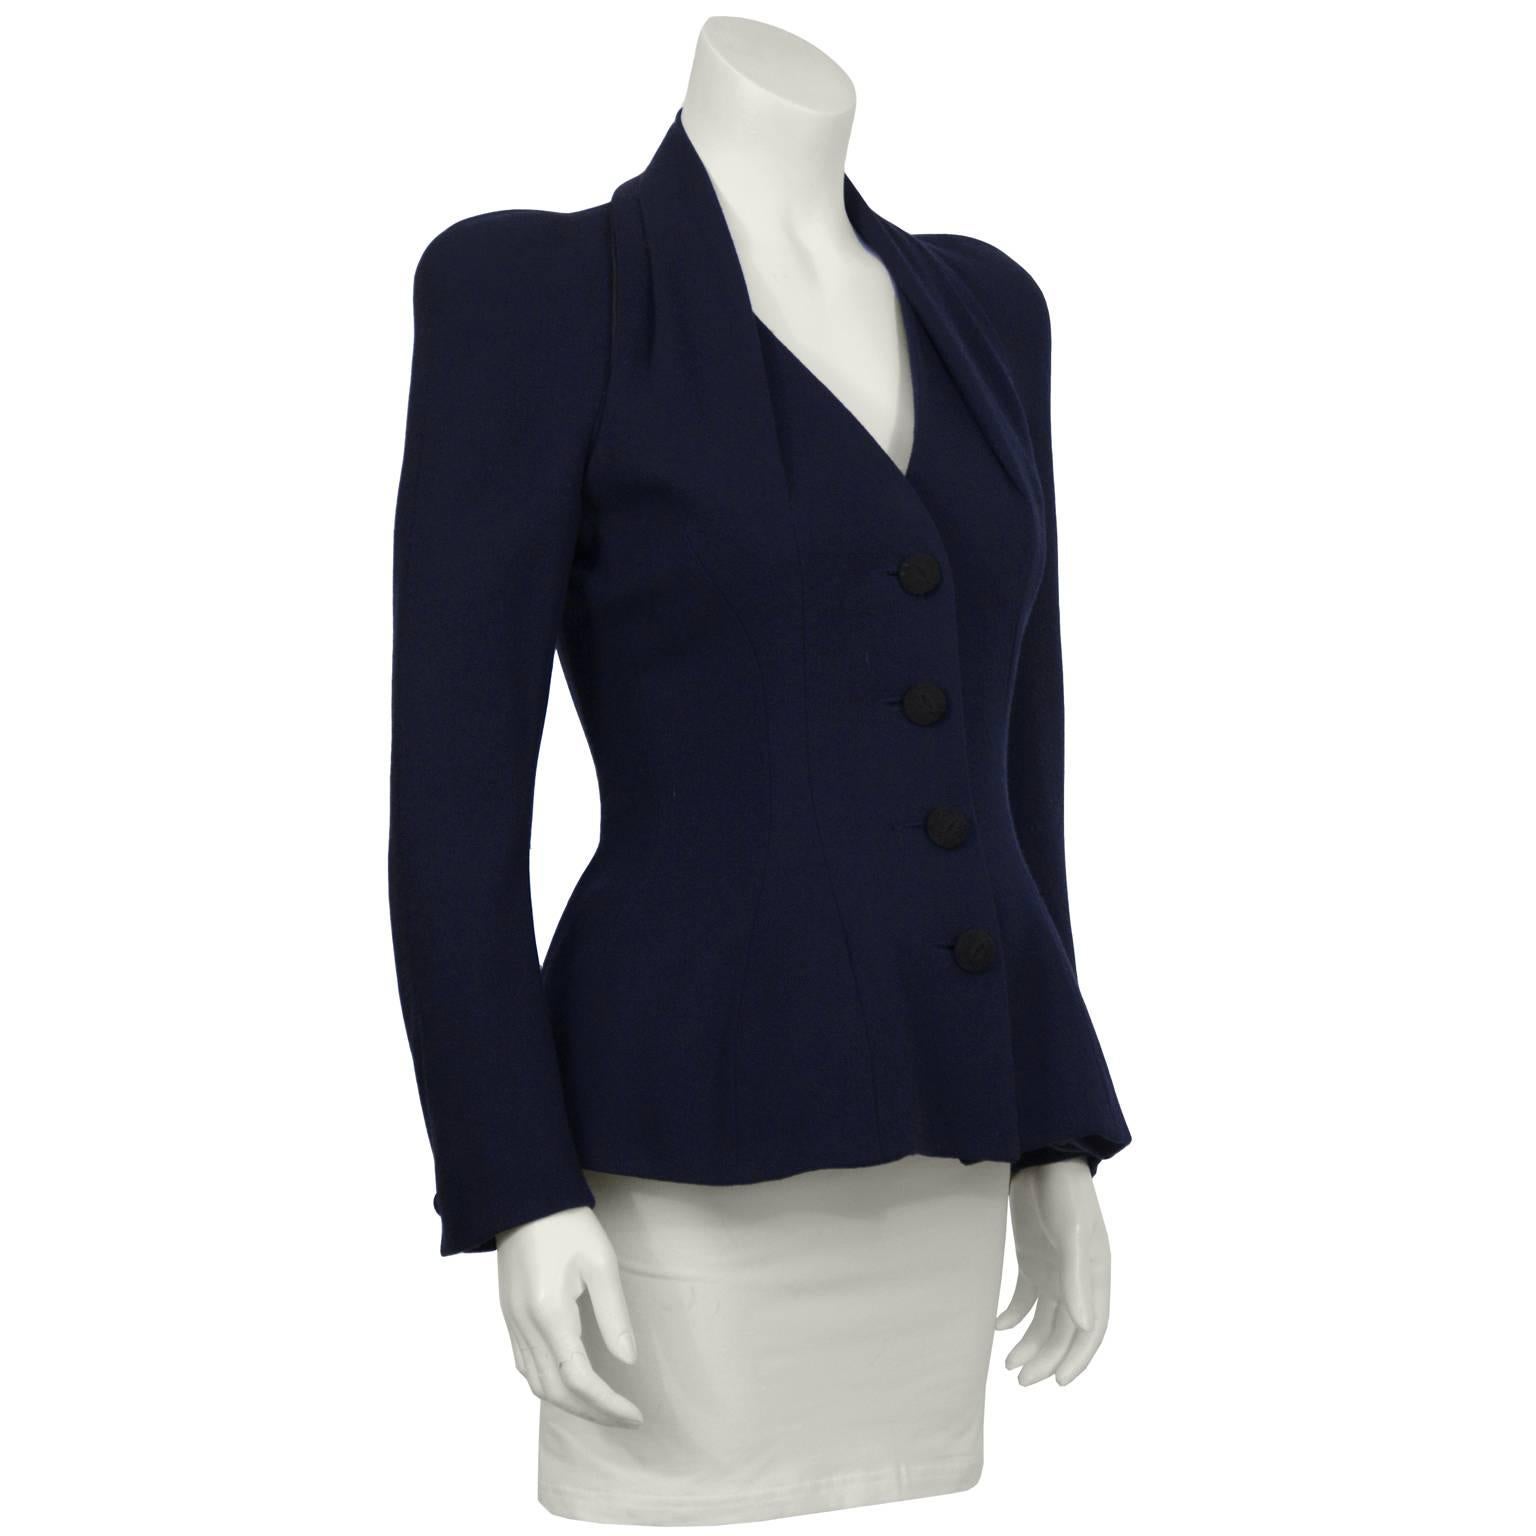 John Galliano 1990’s deep navy wool crepe bar jacket. The jacket features sculpted shoulder pads and a pleated draped neckline that blends into the bust. It is fitted through the waist and has padded hips. Fastens up the front with unique black